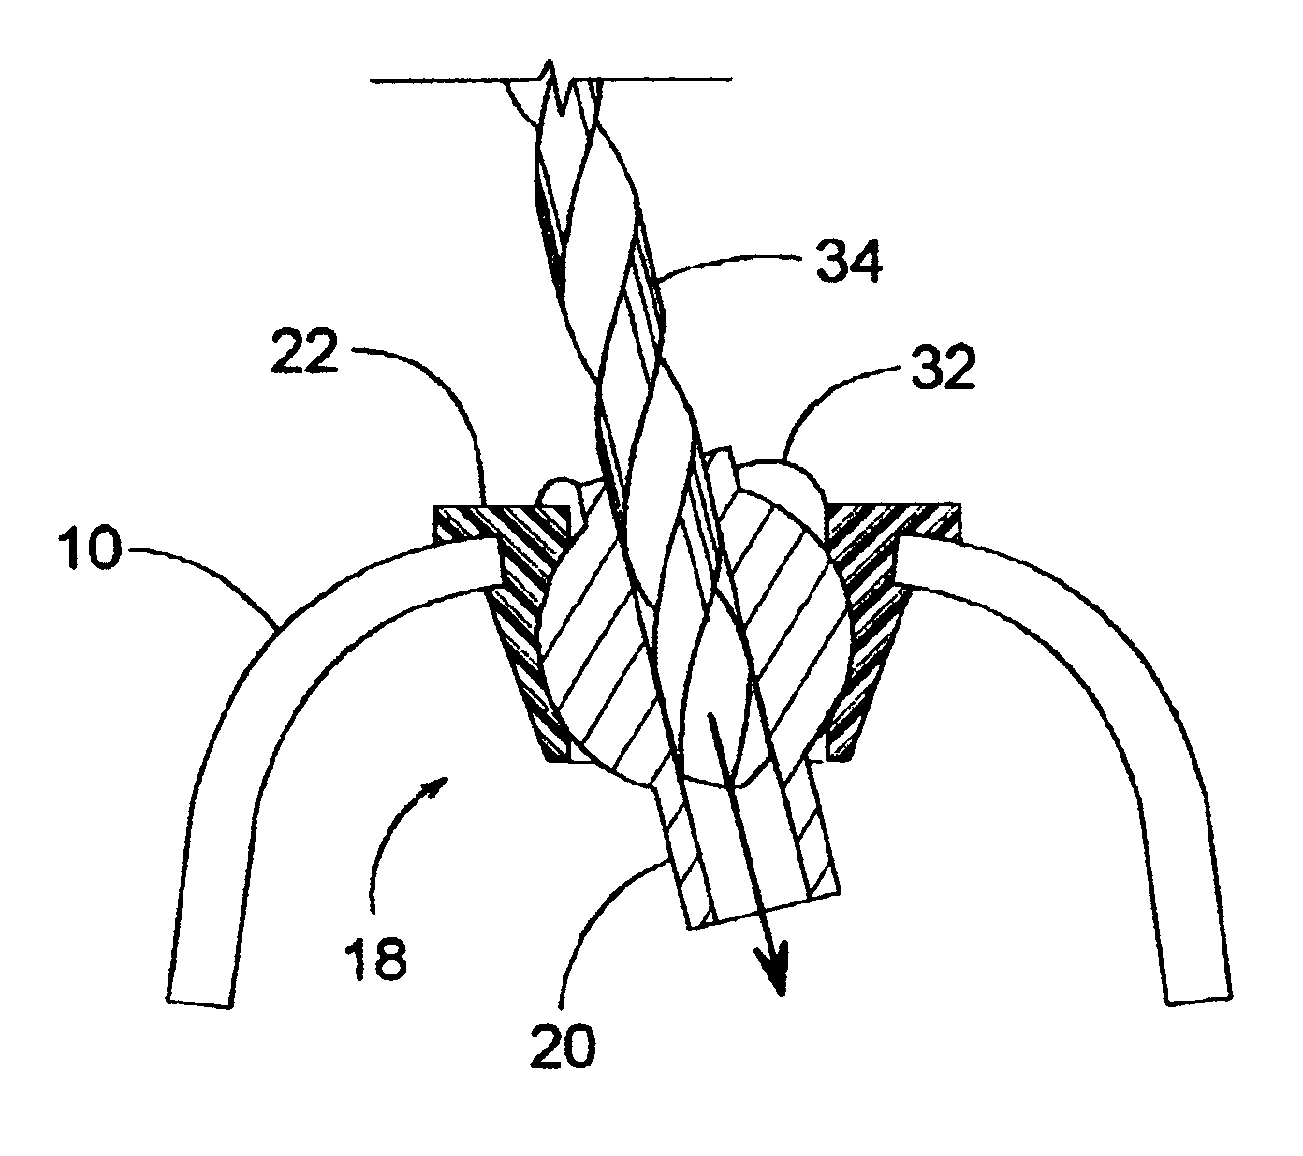 Dental implant tool with attachment feature